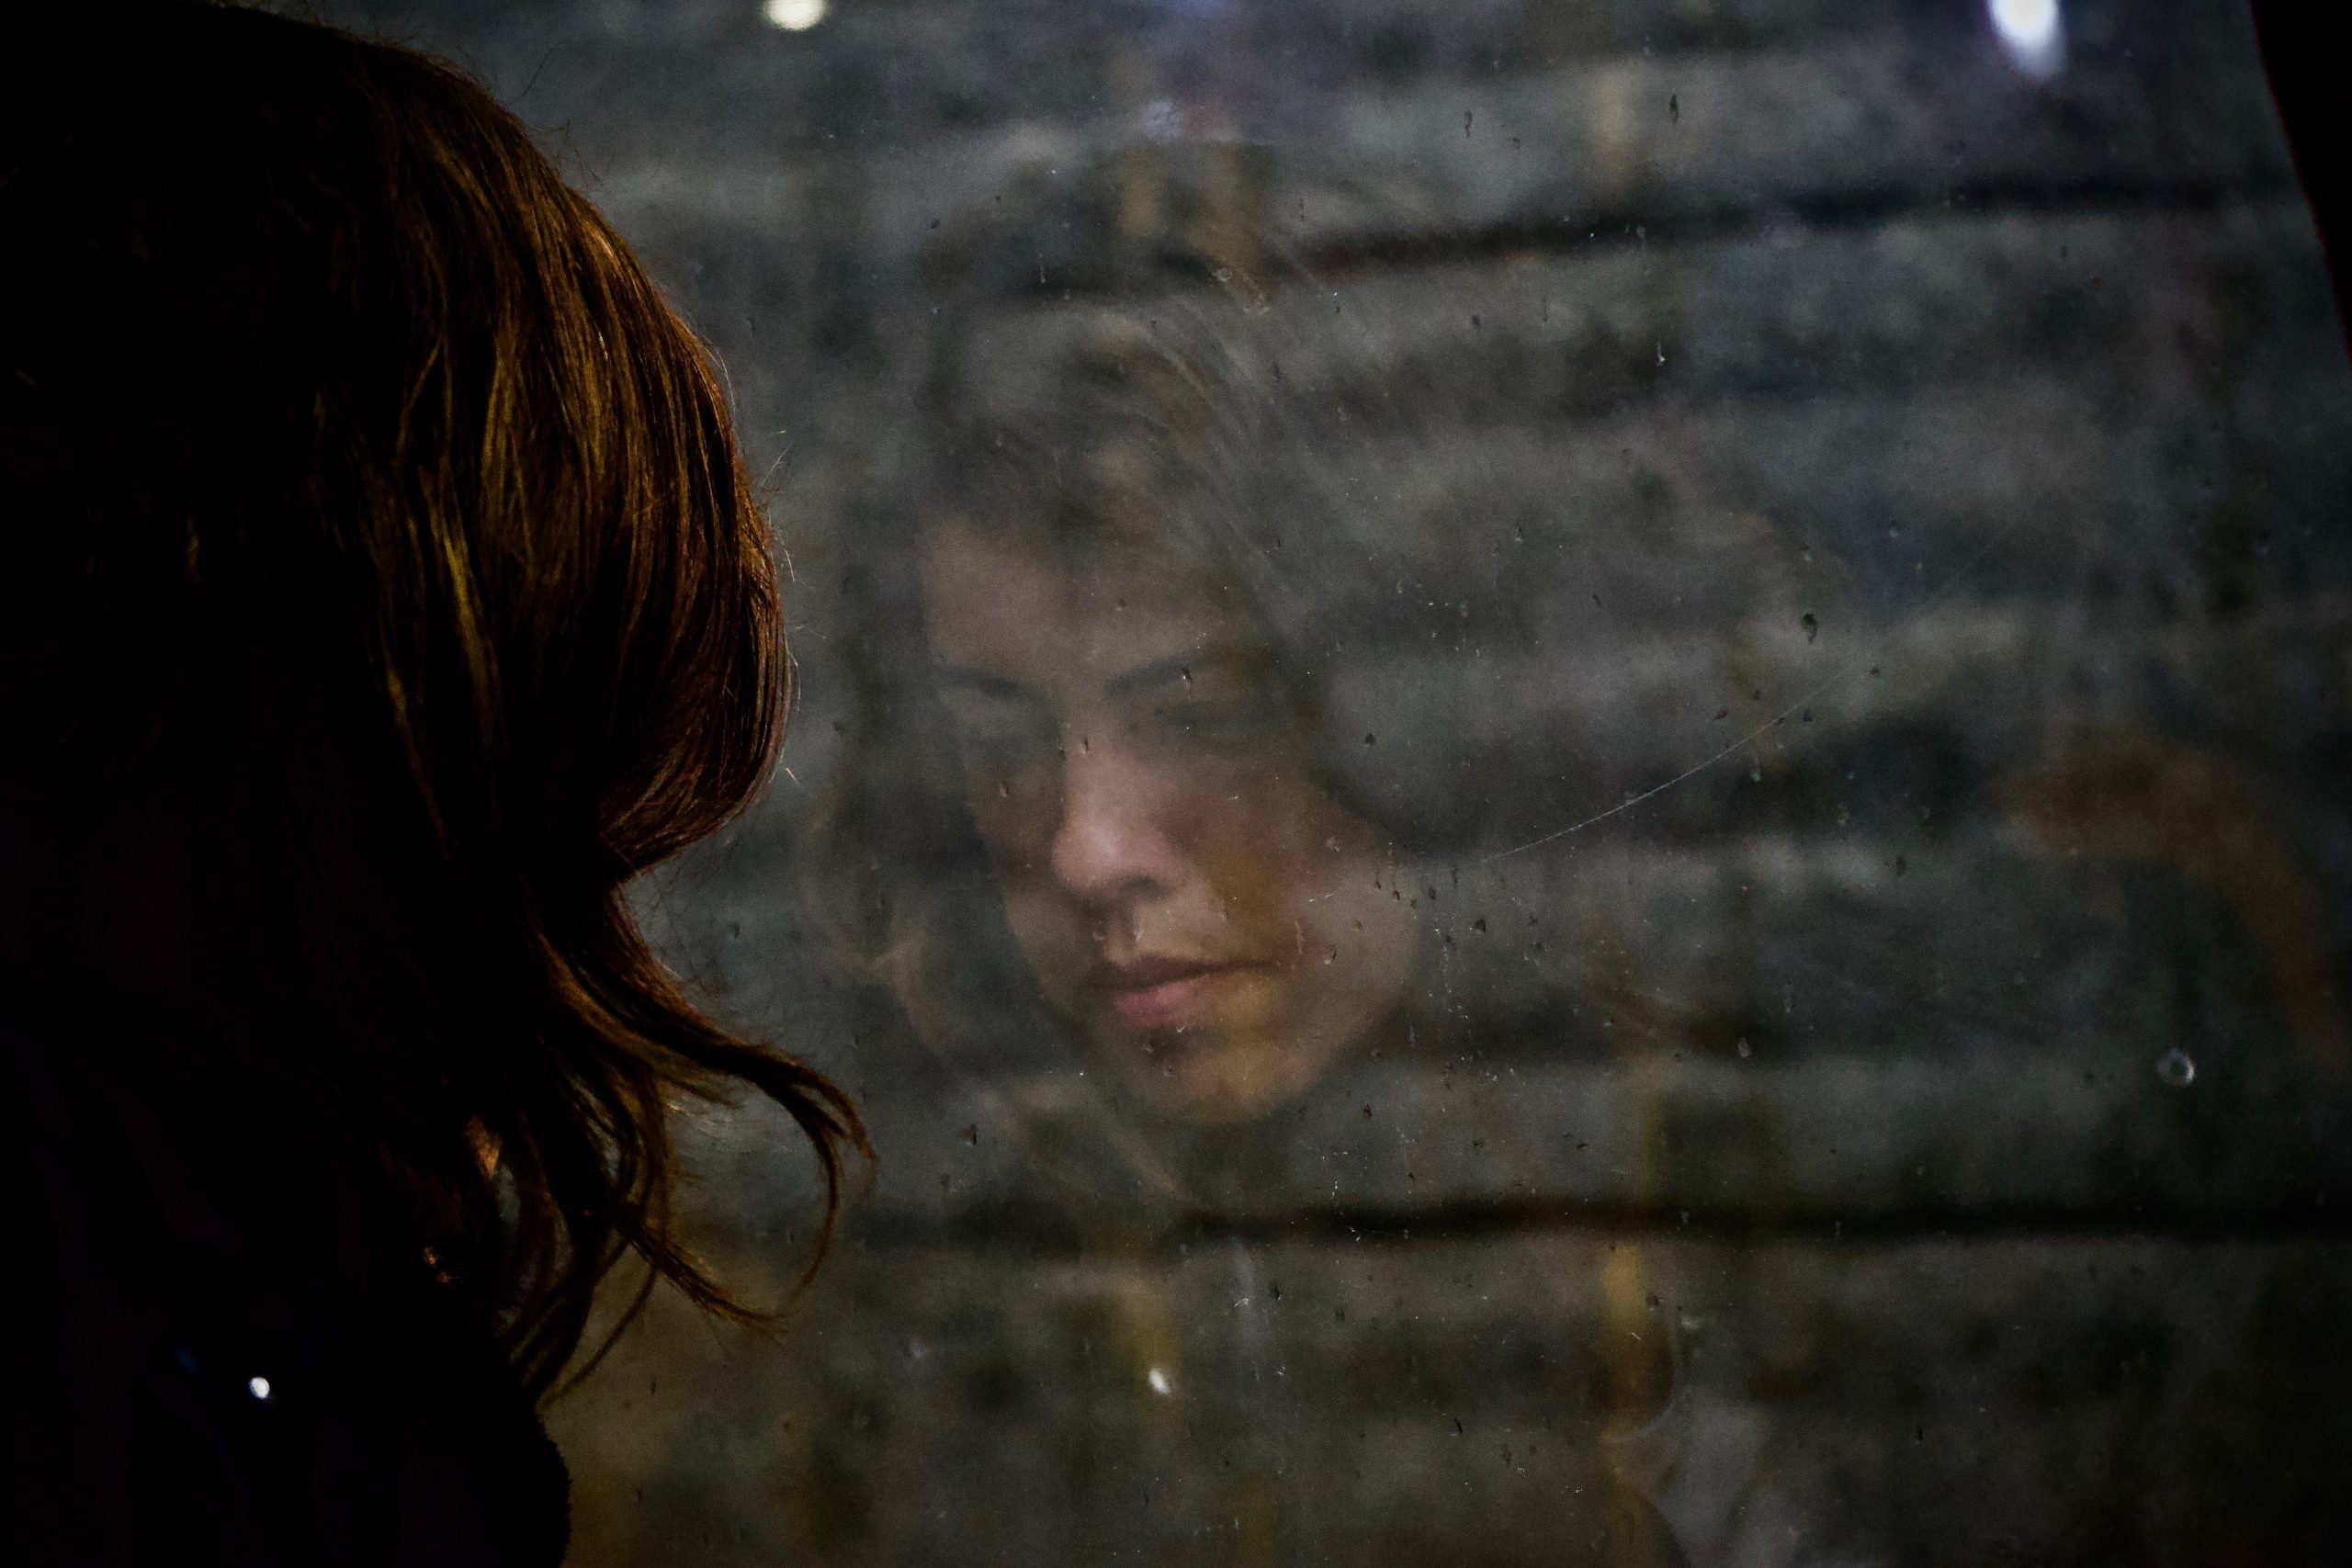 A young person's reflection is shown in a window. They look saddened